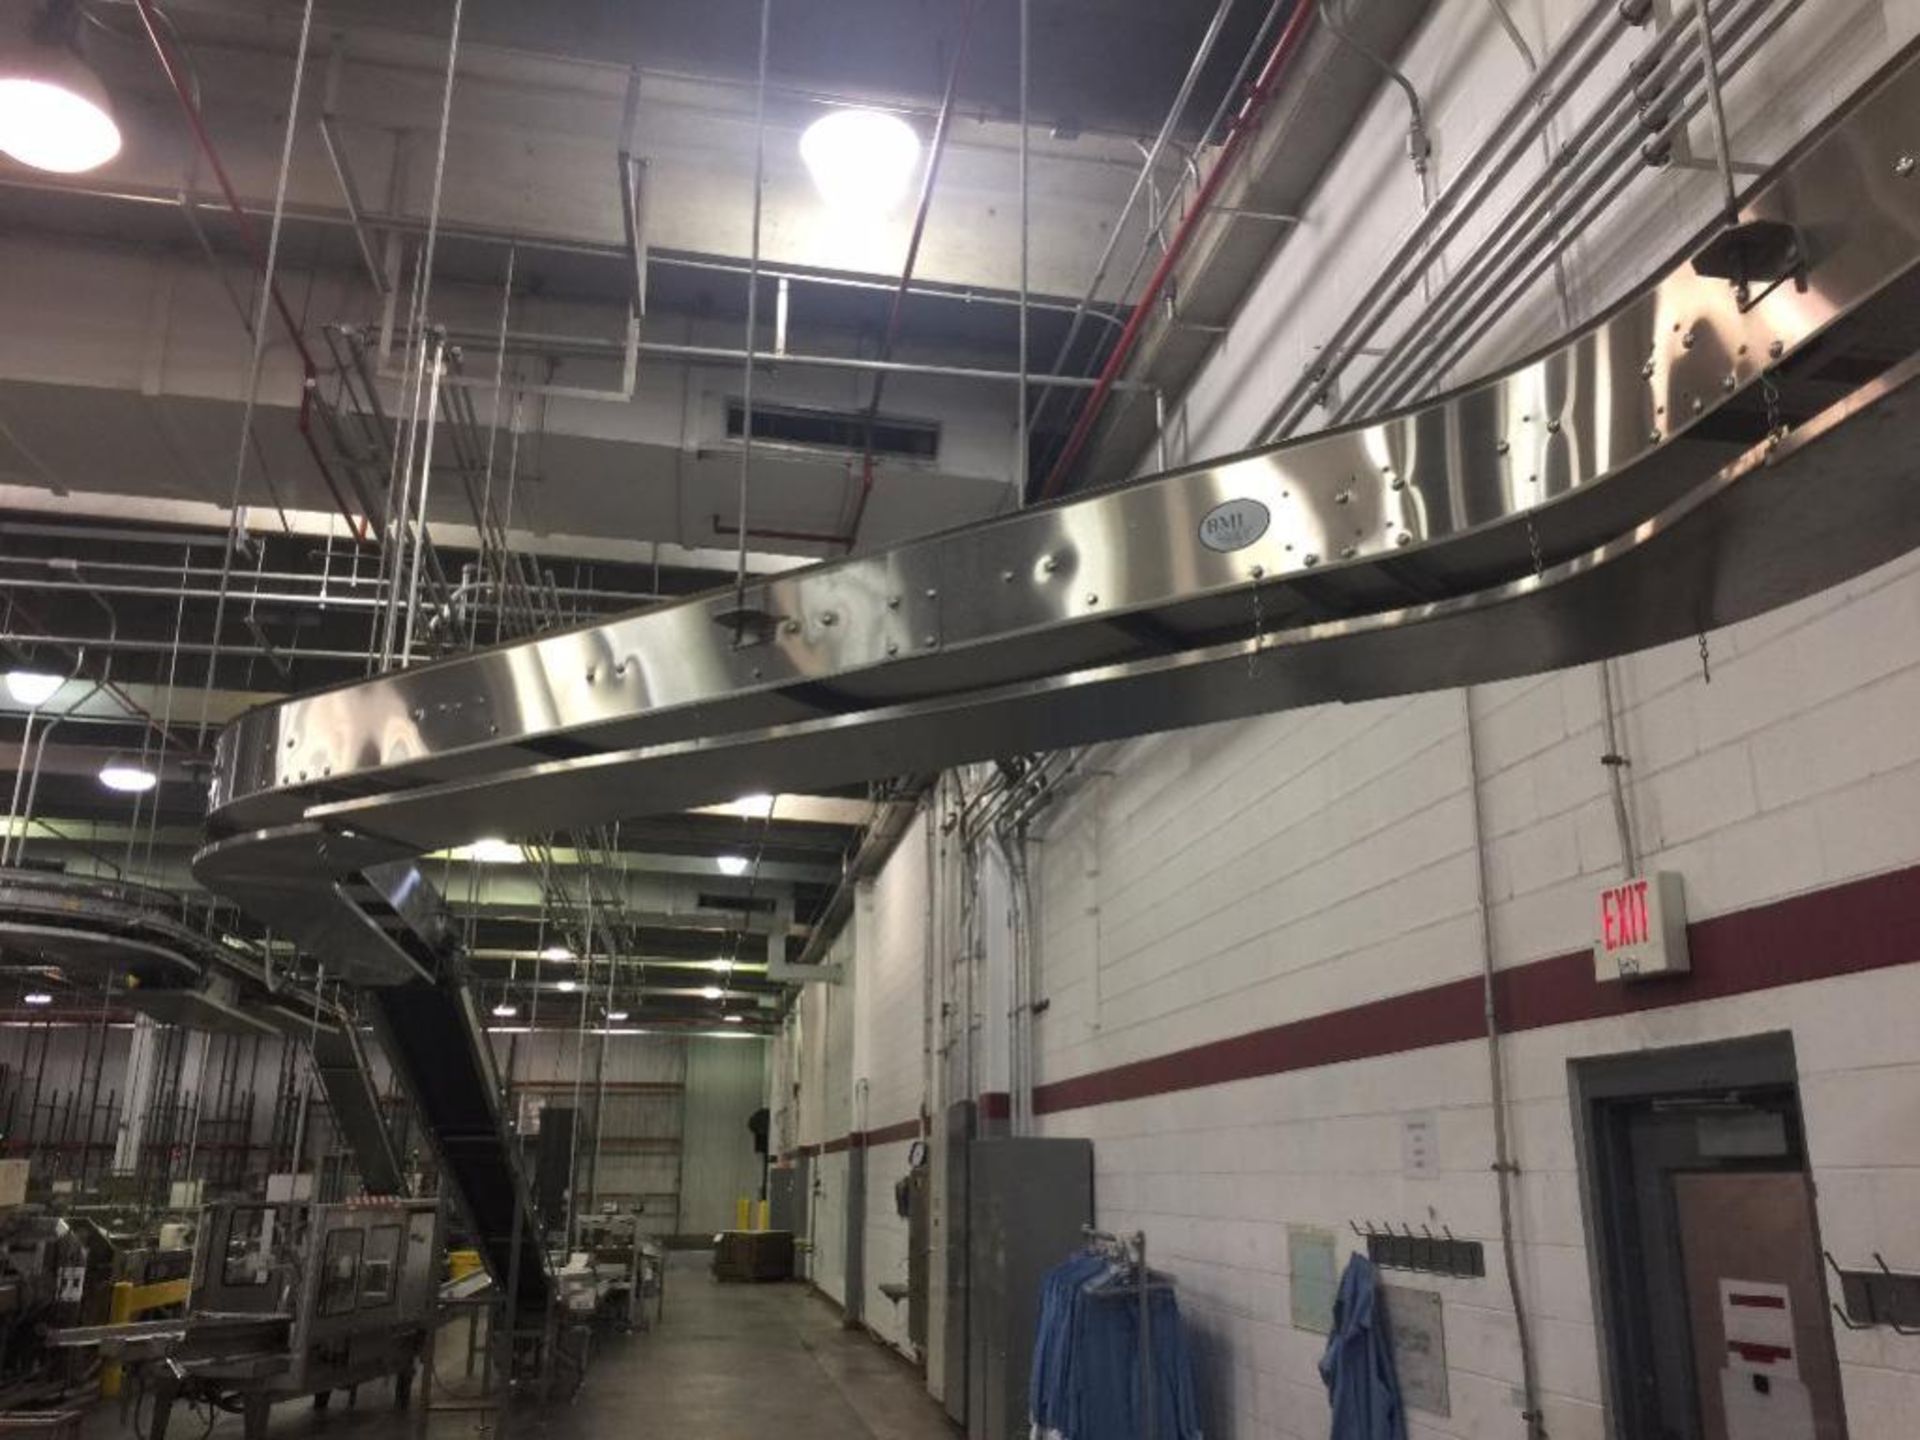 Stainless Steel S-Curve Conveyor - Image 4 of 4